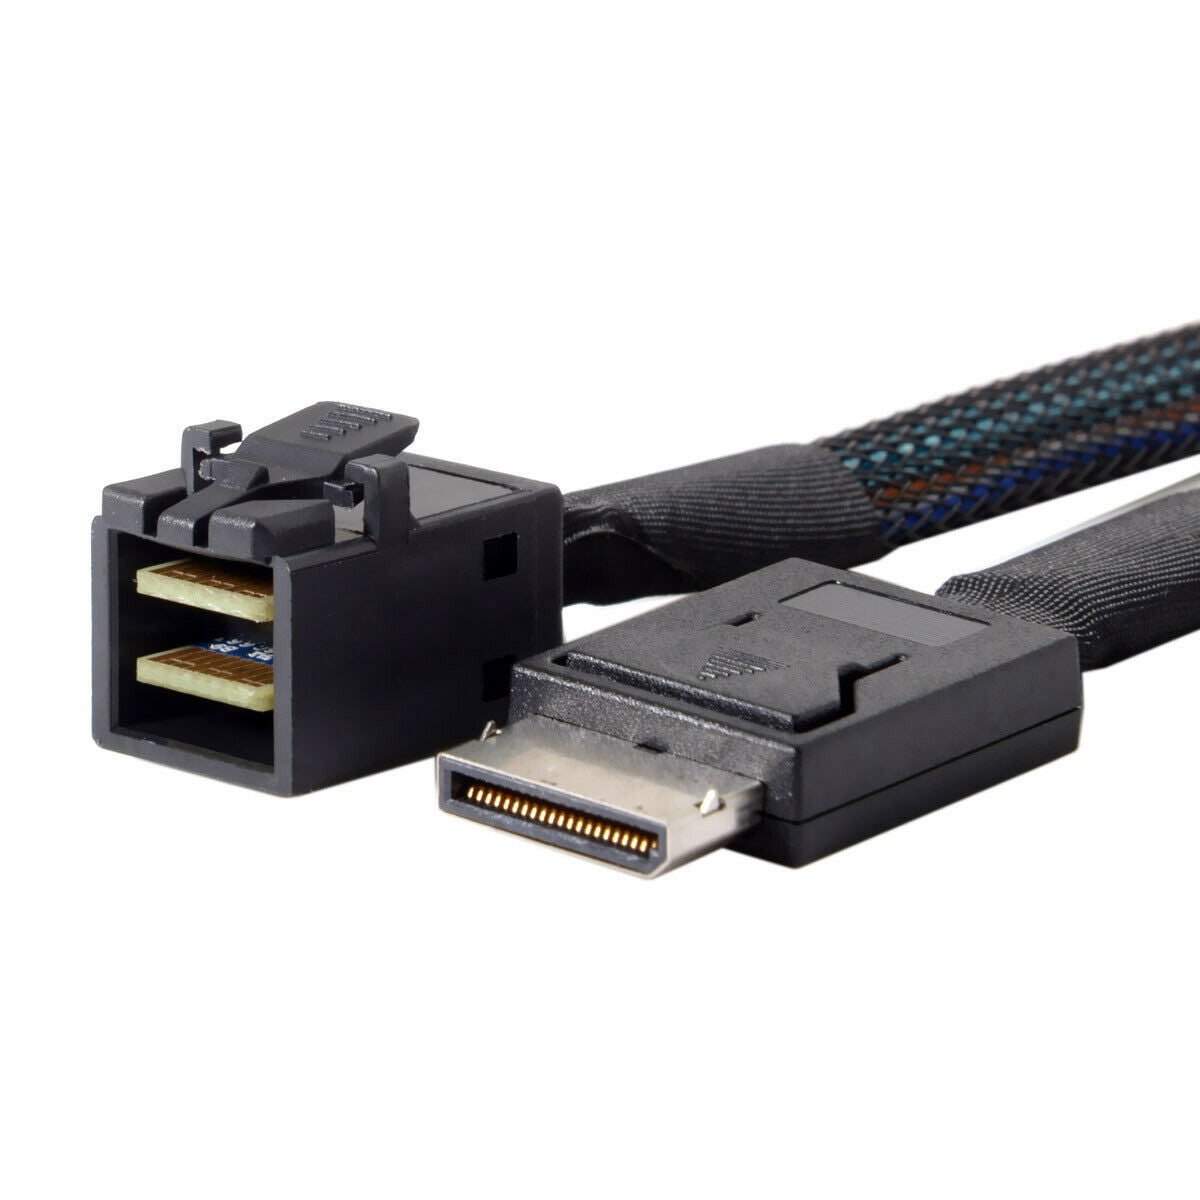 OCuLink PCIe PCI-Express SFF-8611 4i to SFF-8643 SSD Data Active Cable